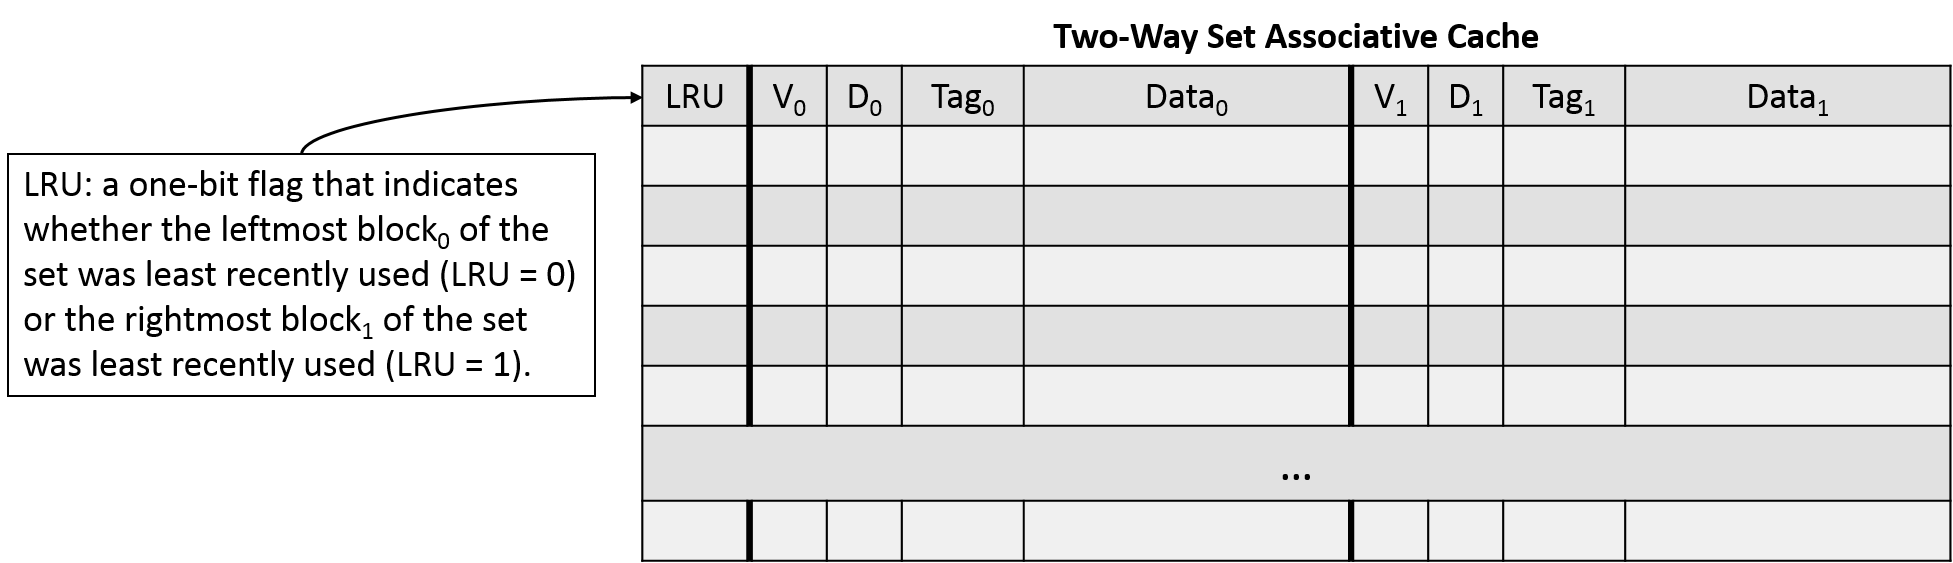 The LRU bit is a one-bit flag that indicates whether the leftmost block of the set was least recently used (LRU = 0) or the rightmost block of the set was least recently used (LRU = 1).